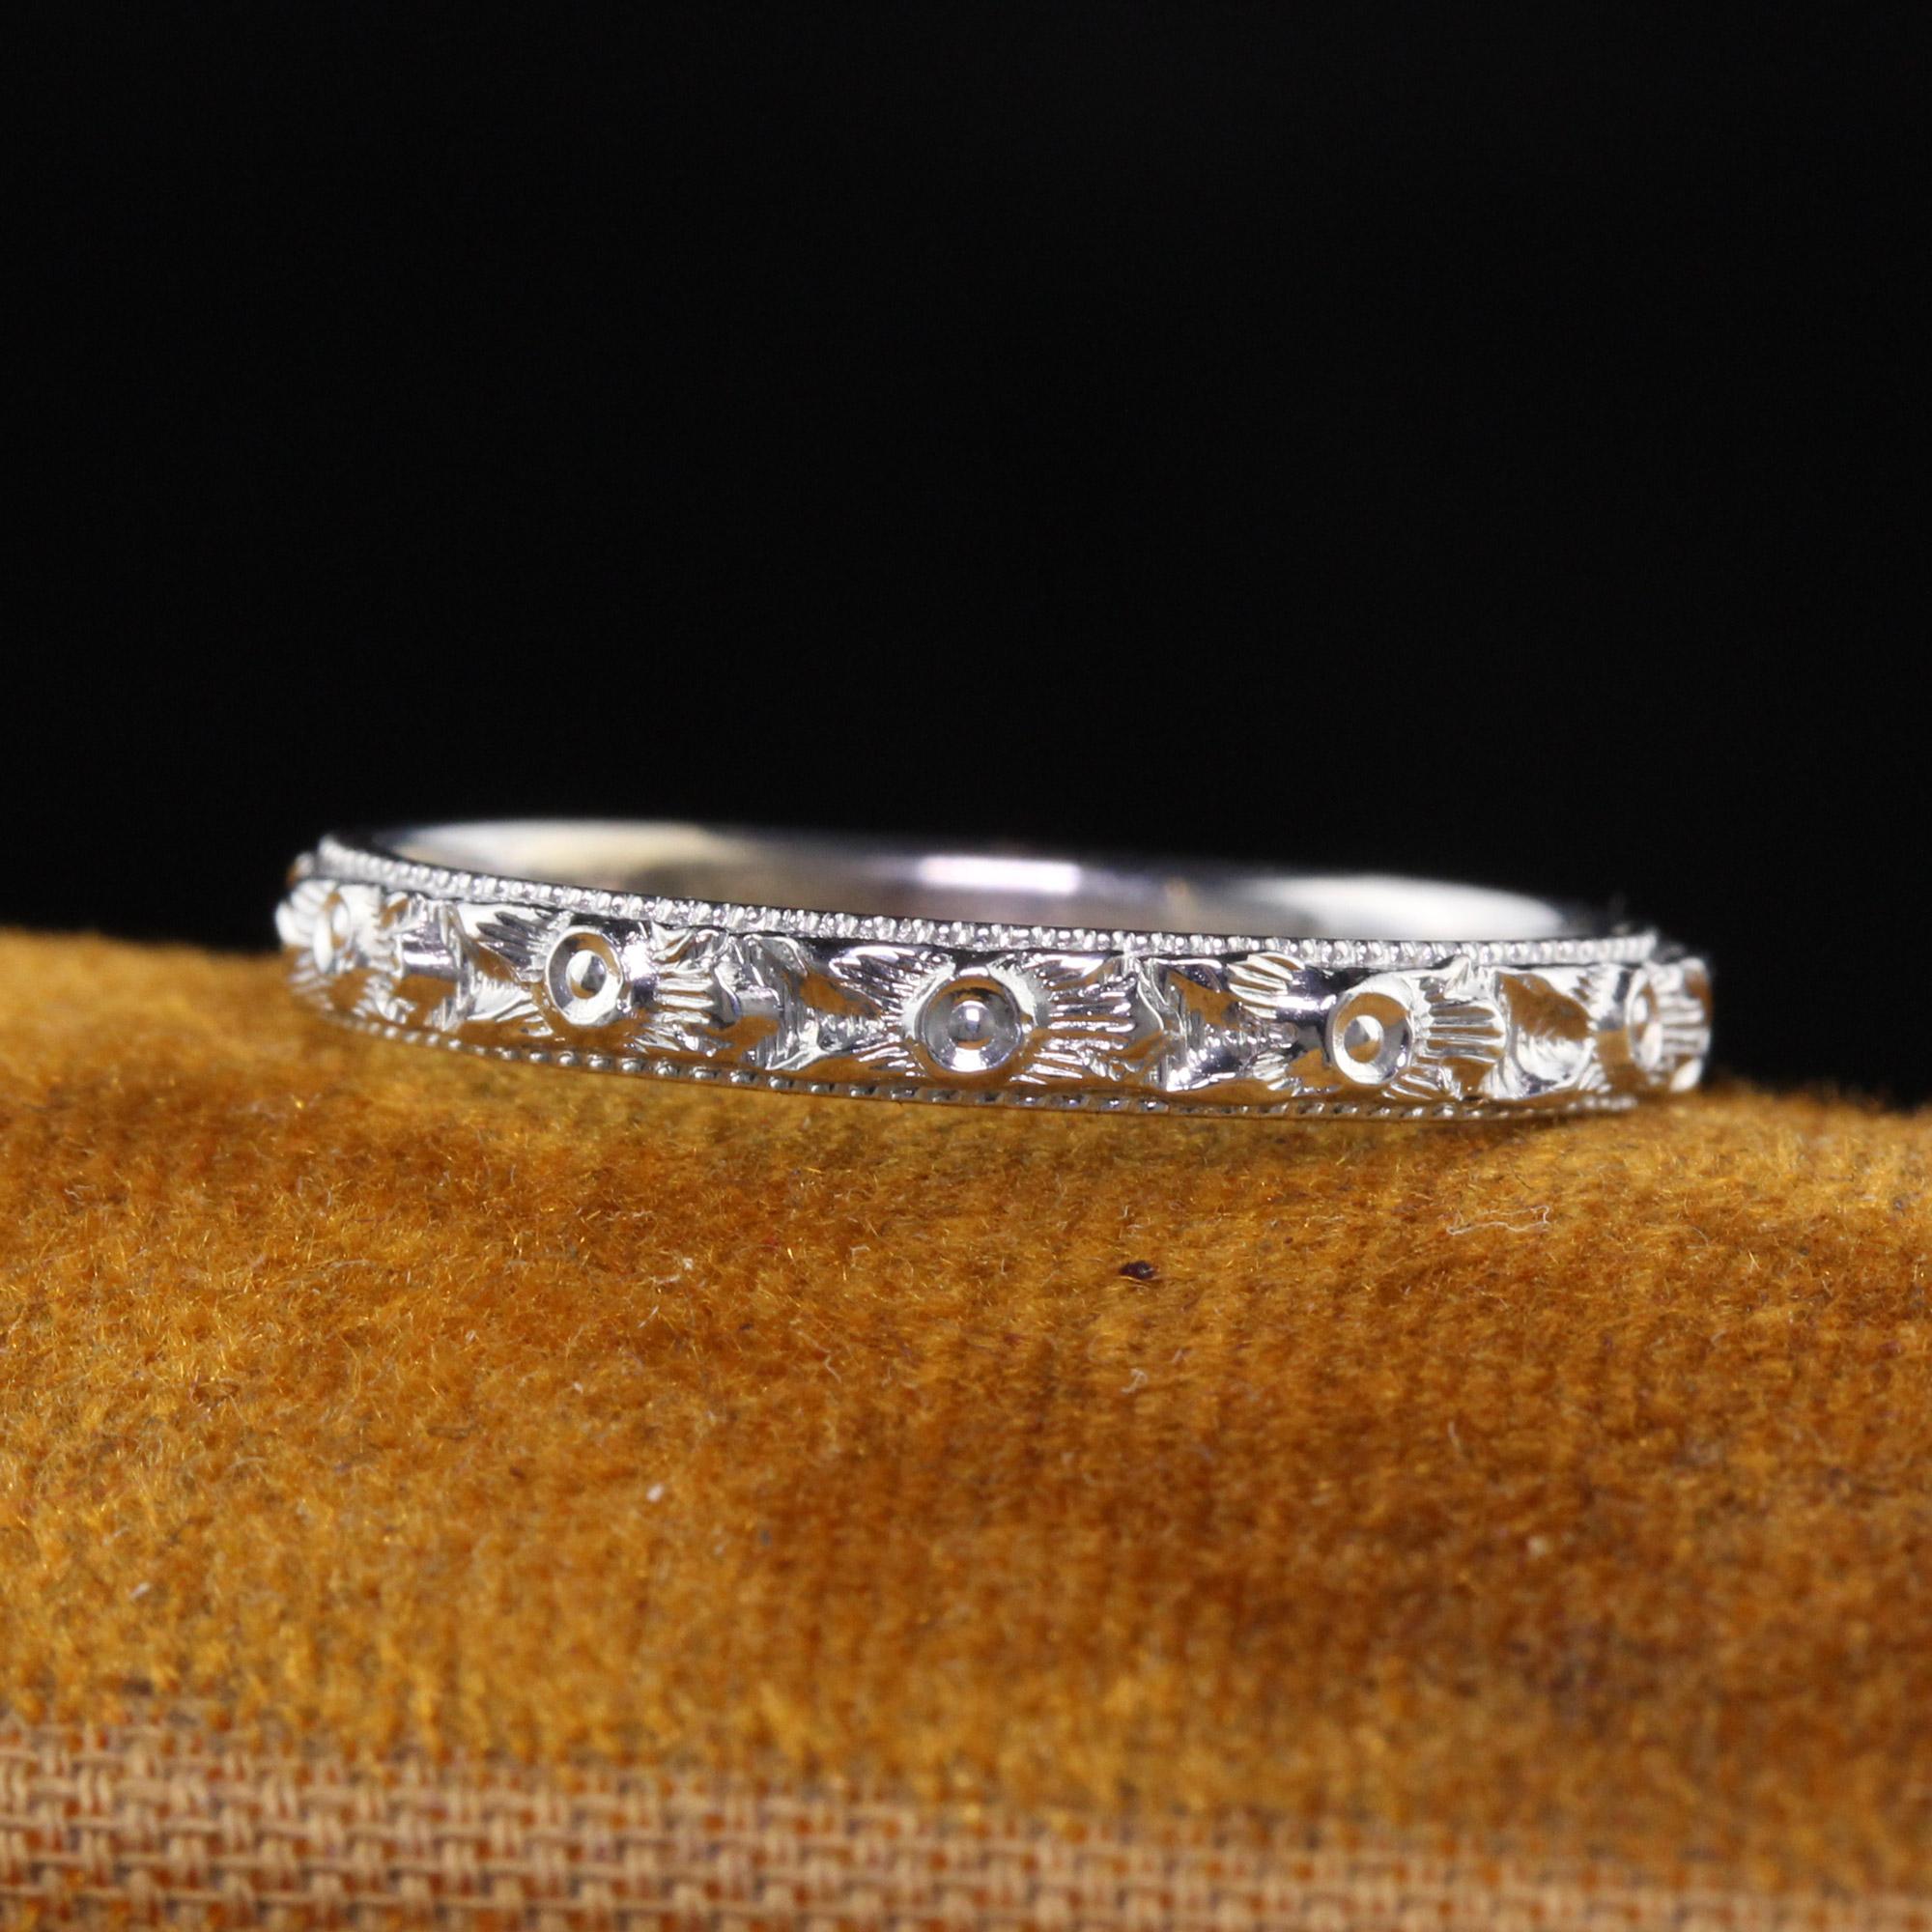 Beautiful Antique Art Deco 18K White Gold Engraved Wedding Band - Size 5 1/4. This crisp wedding band has very fine and deep engravings going around the entire band and is engraved 